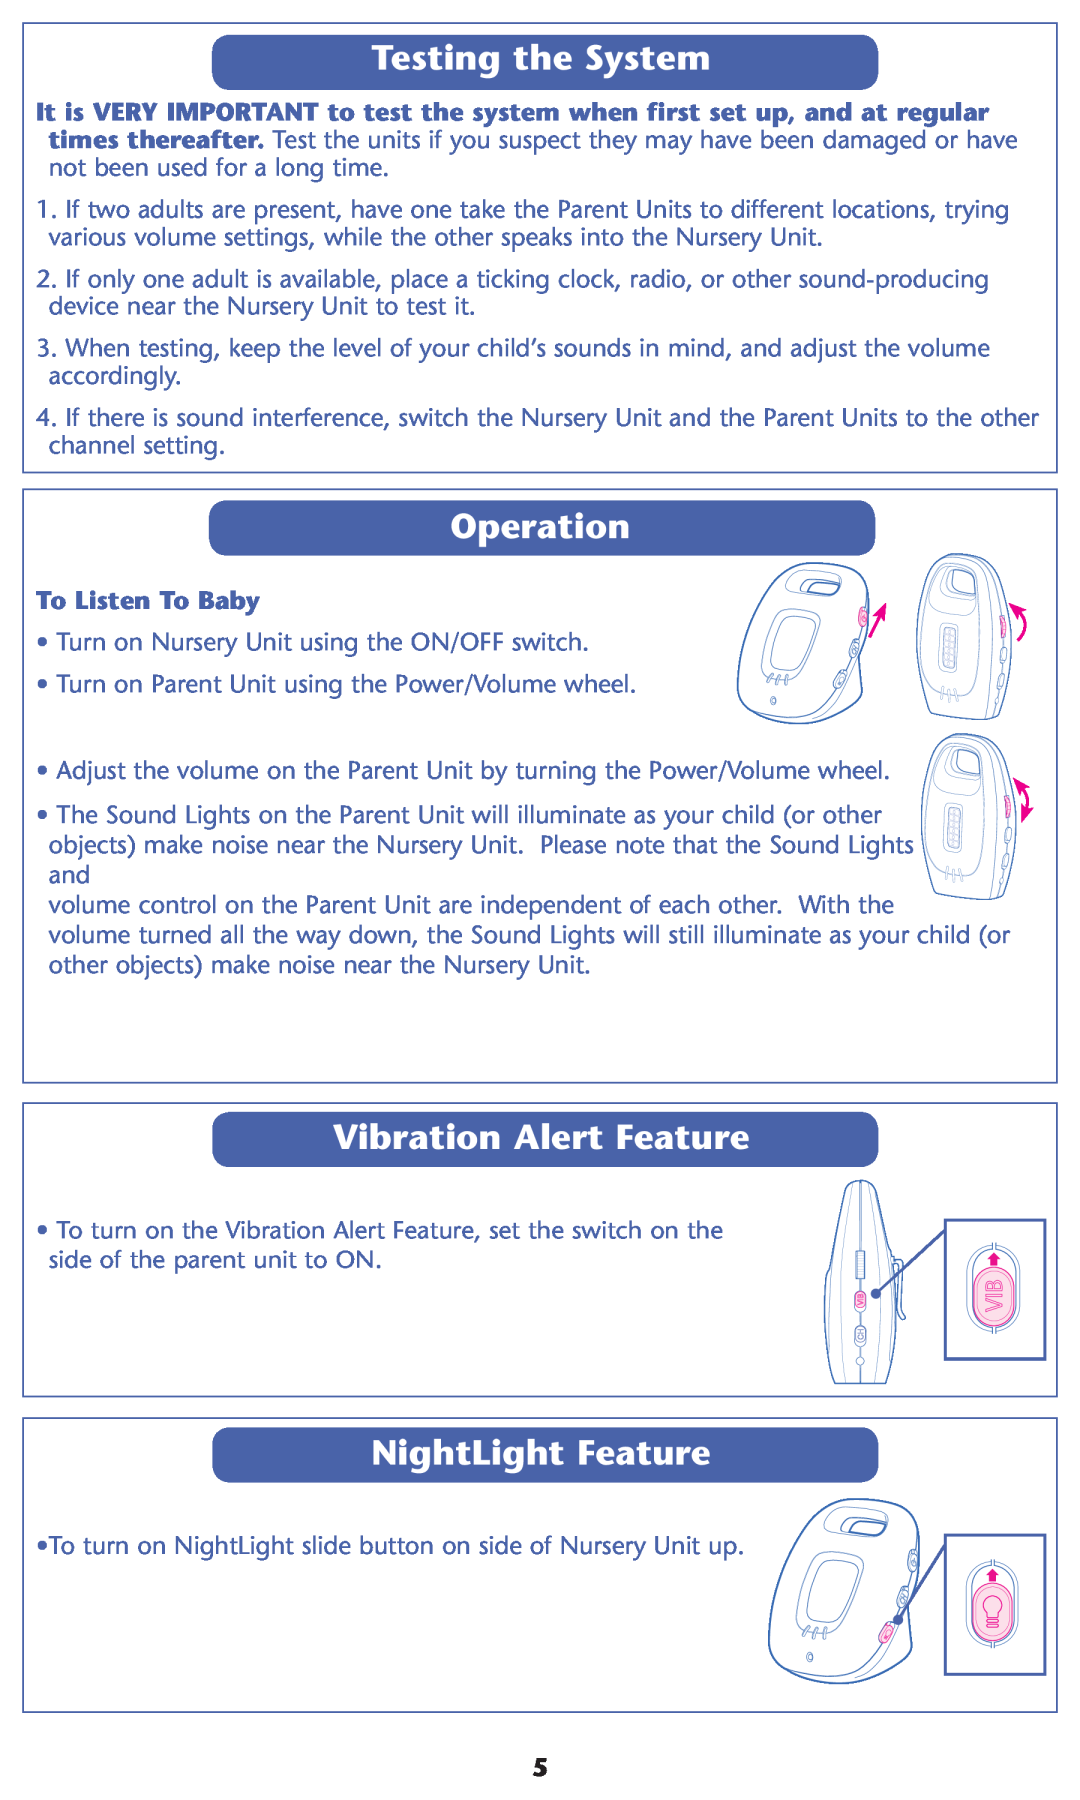 Graco 2L01VIB, 2L02VIB Testing the System, Operation, Vibration Alert Feature, NightLight Feature, To Listen To Baby 